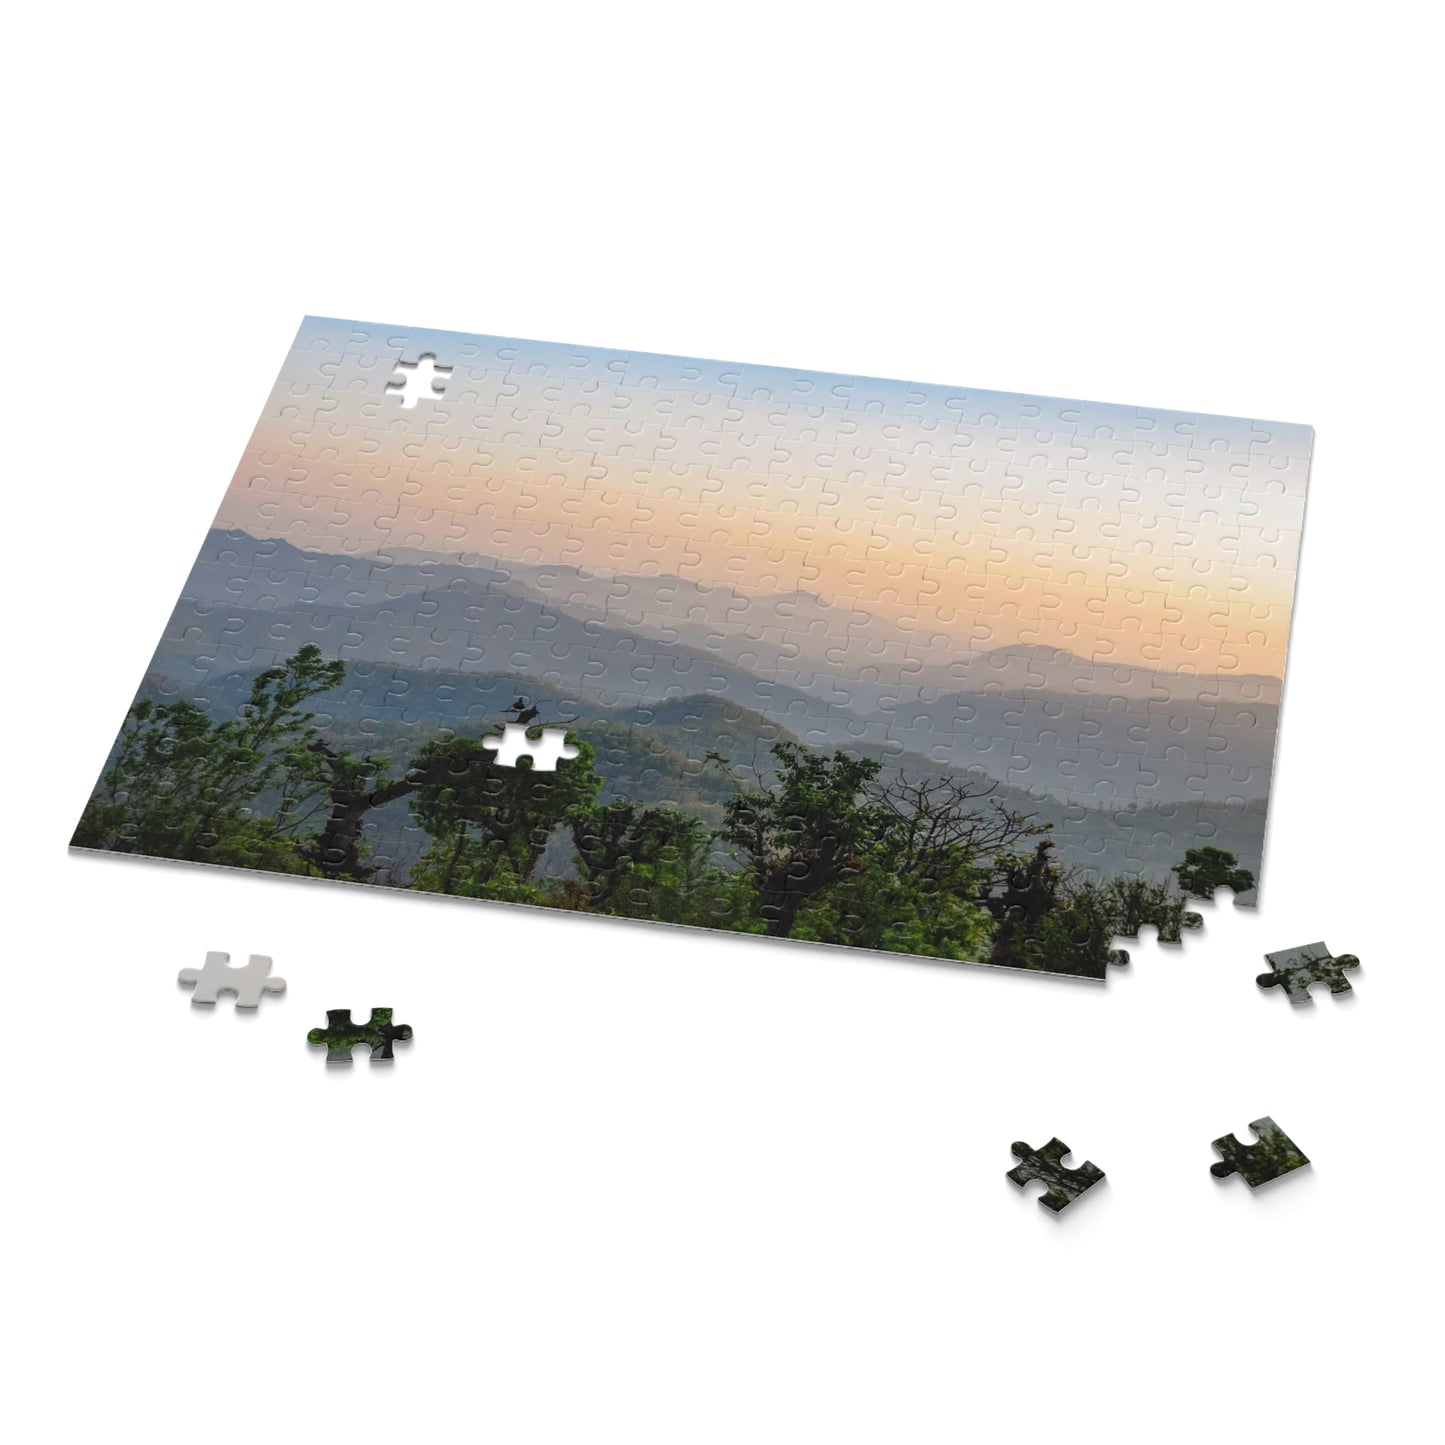 252 Piece Puzzle - Sunset in the Himalayas, Nepal - Leah Ramuglia Photography